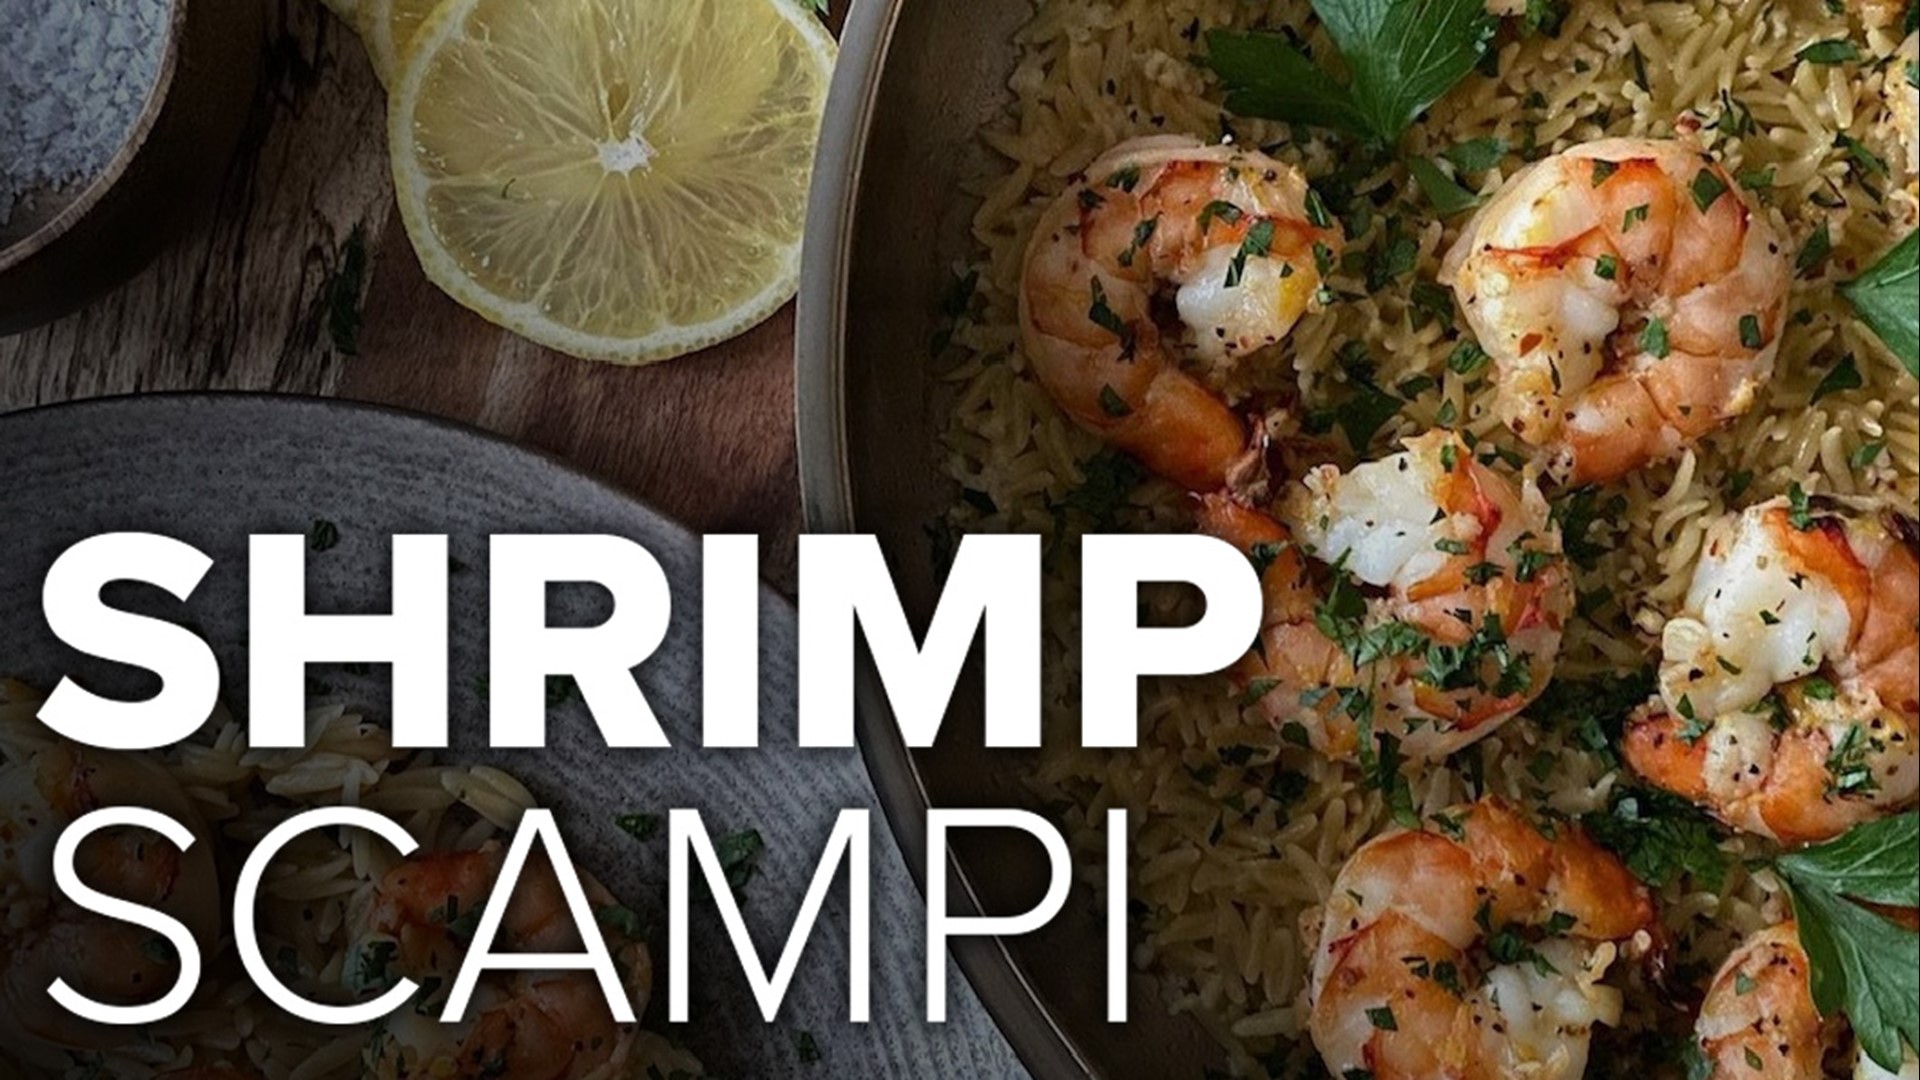 It's National Shrimp Scampi Day! But do we really need an excuse to learn this classic Italian dish?